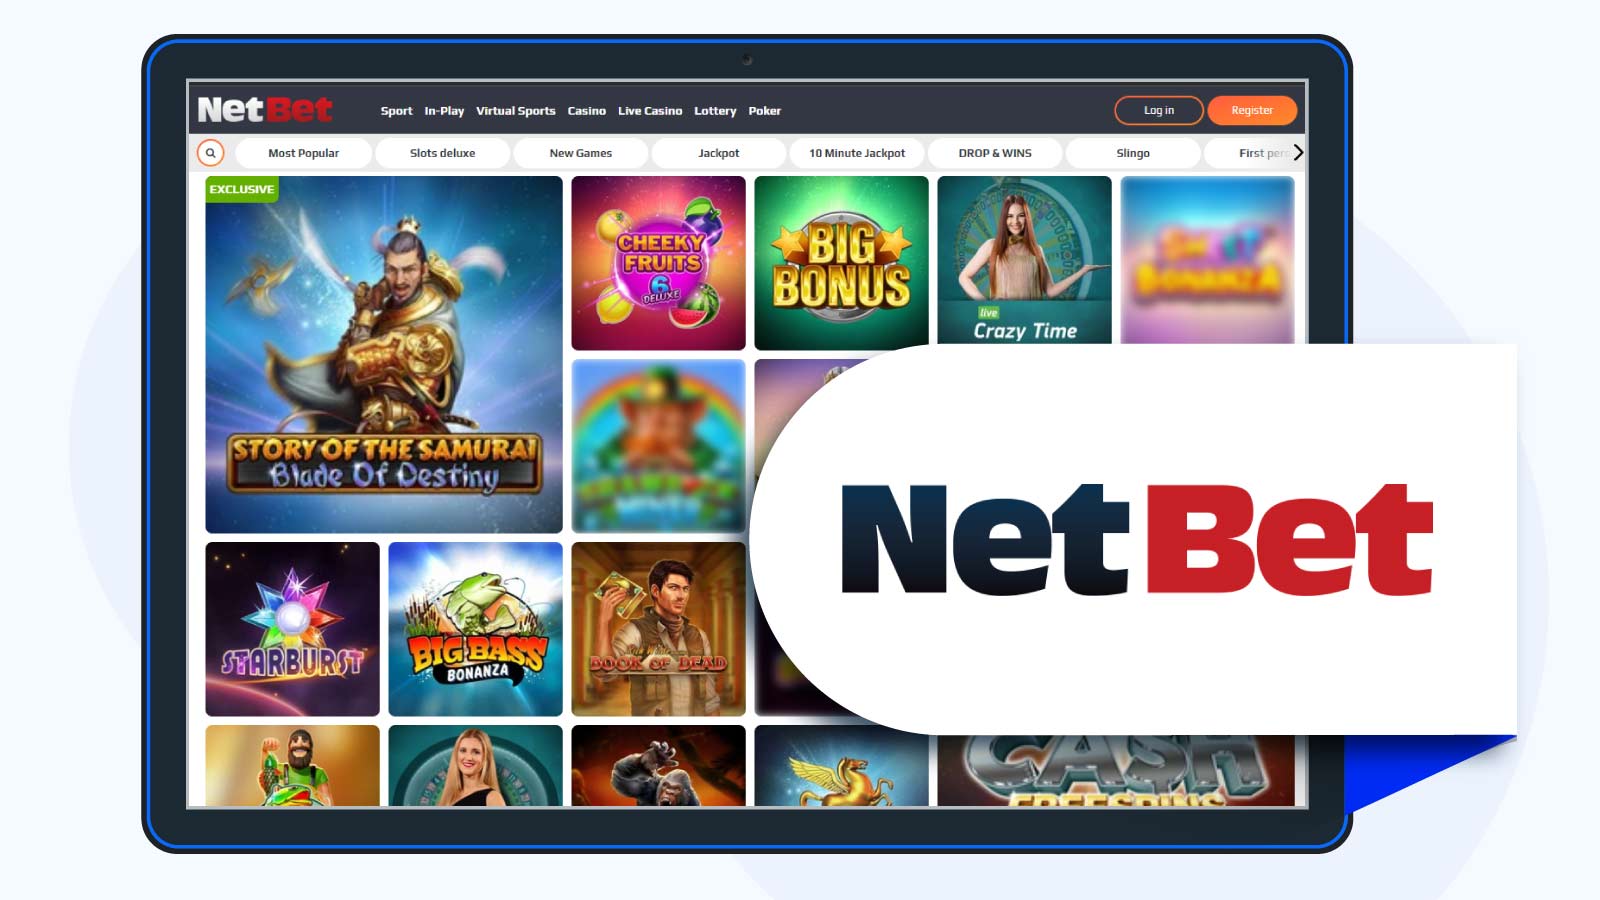 NetBet Casino 25 Free Spins on Sign-Up